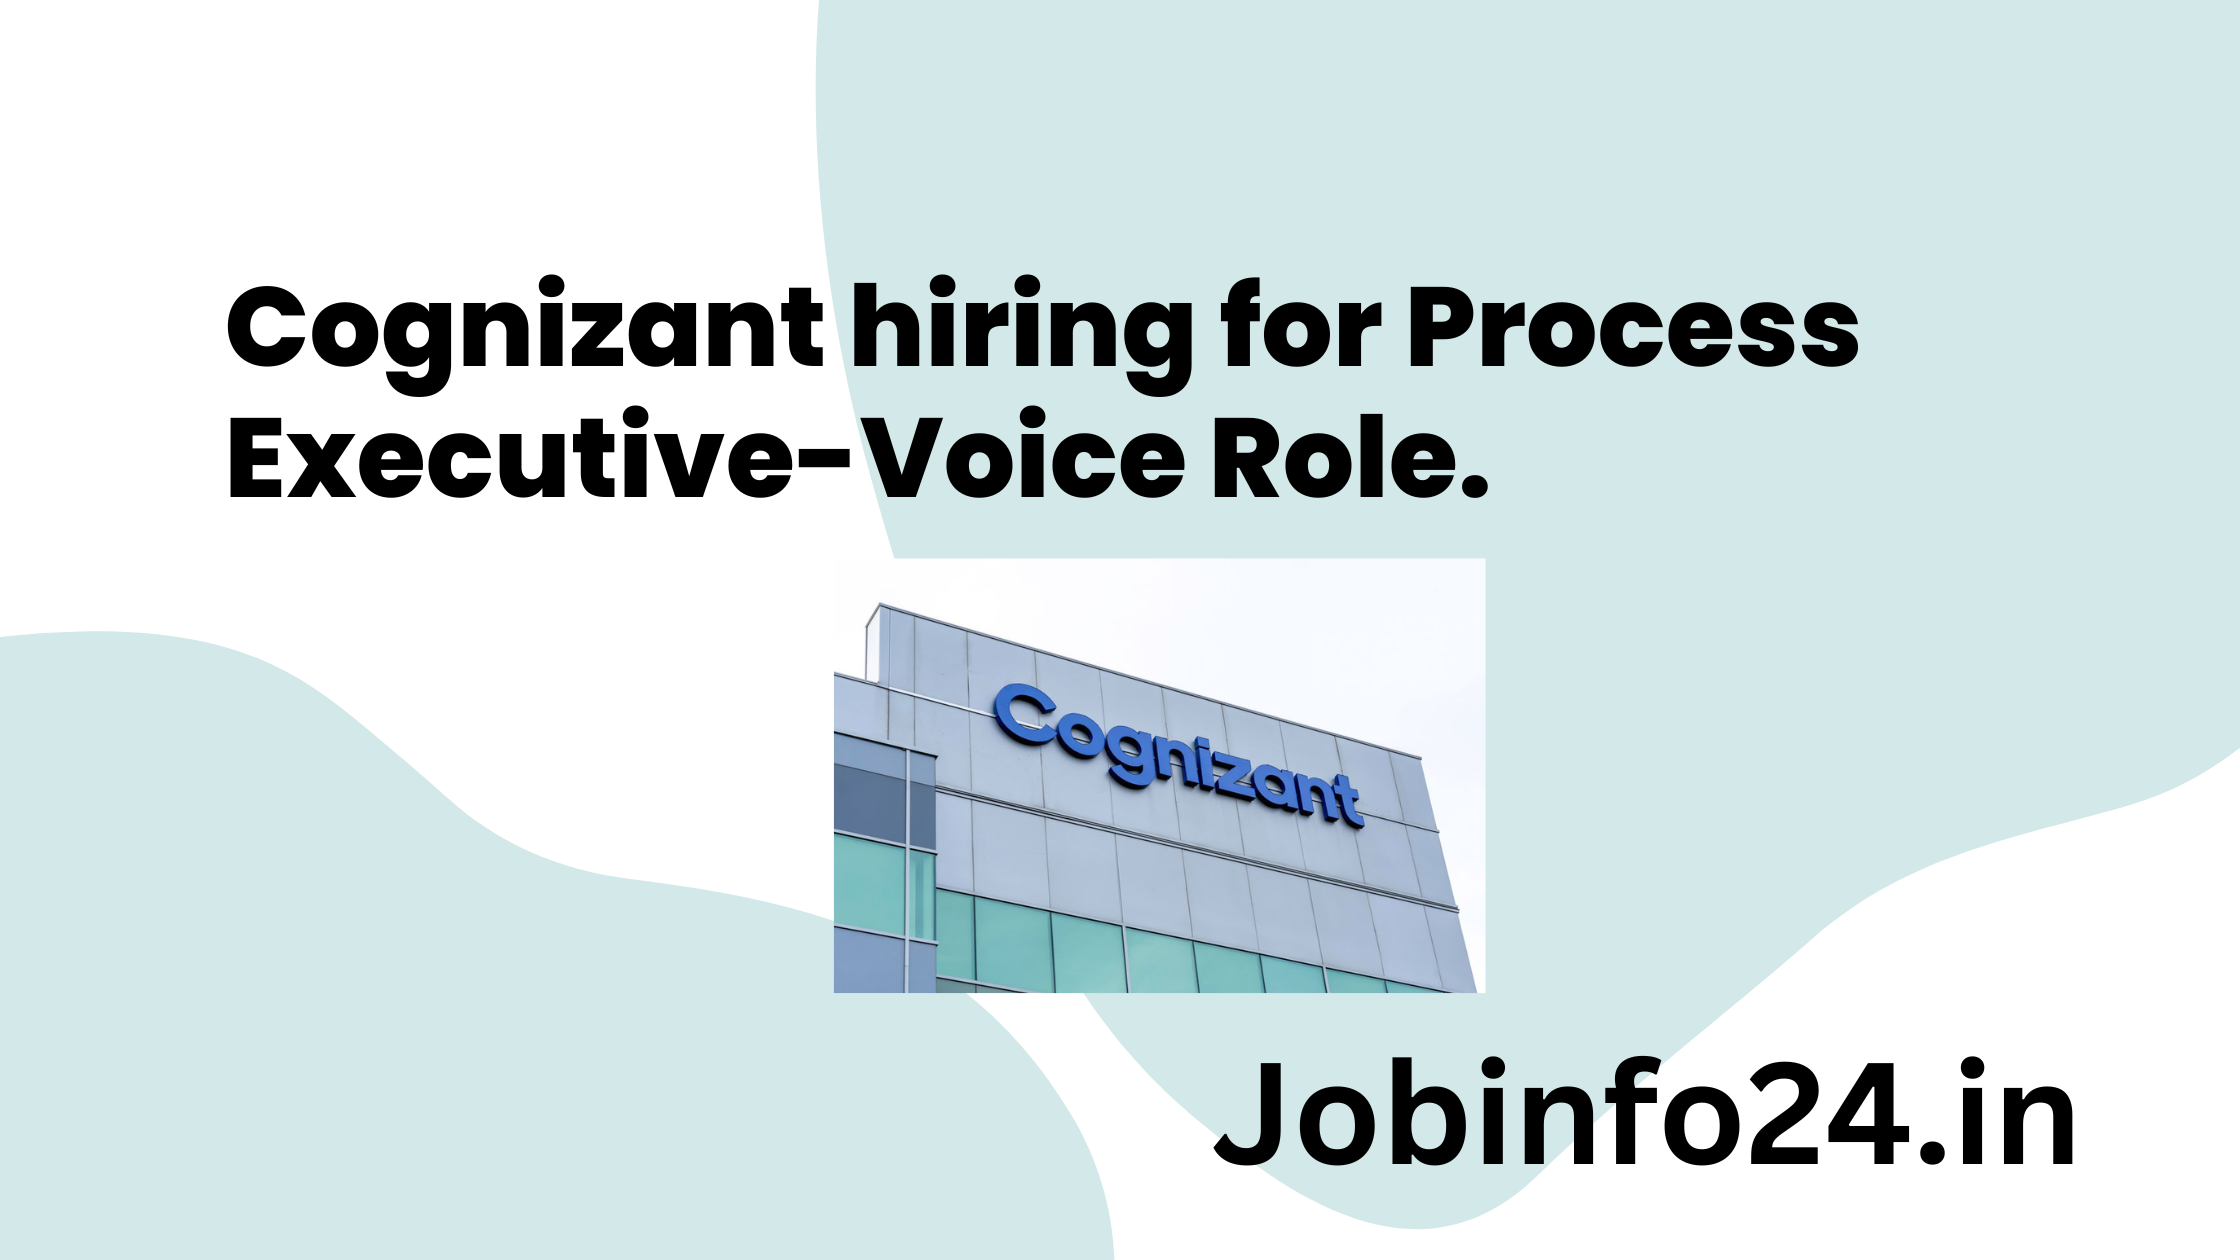 Cognizant hiring for Process Executive-Voice Role.